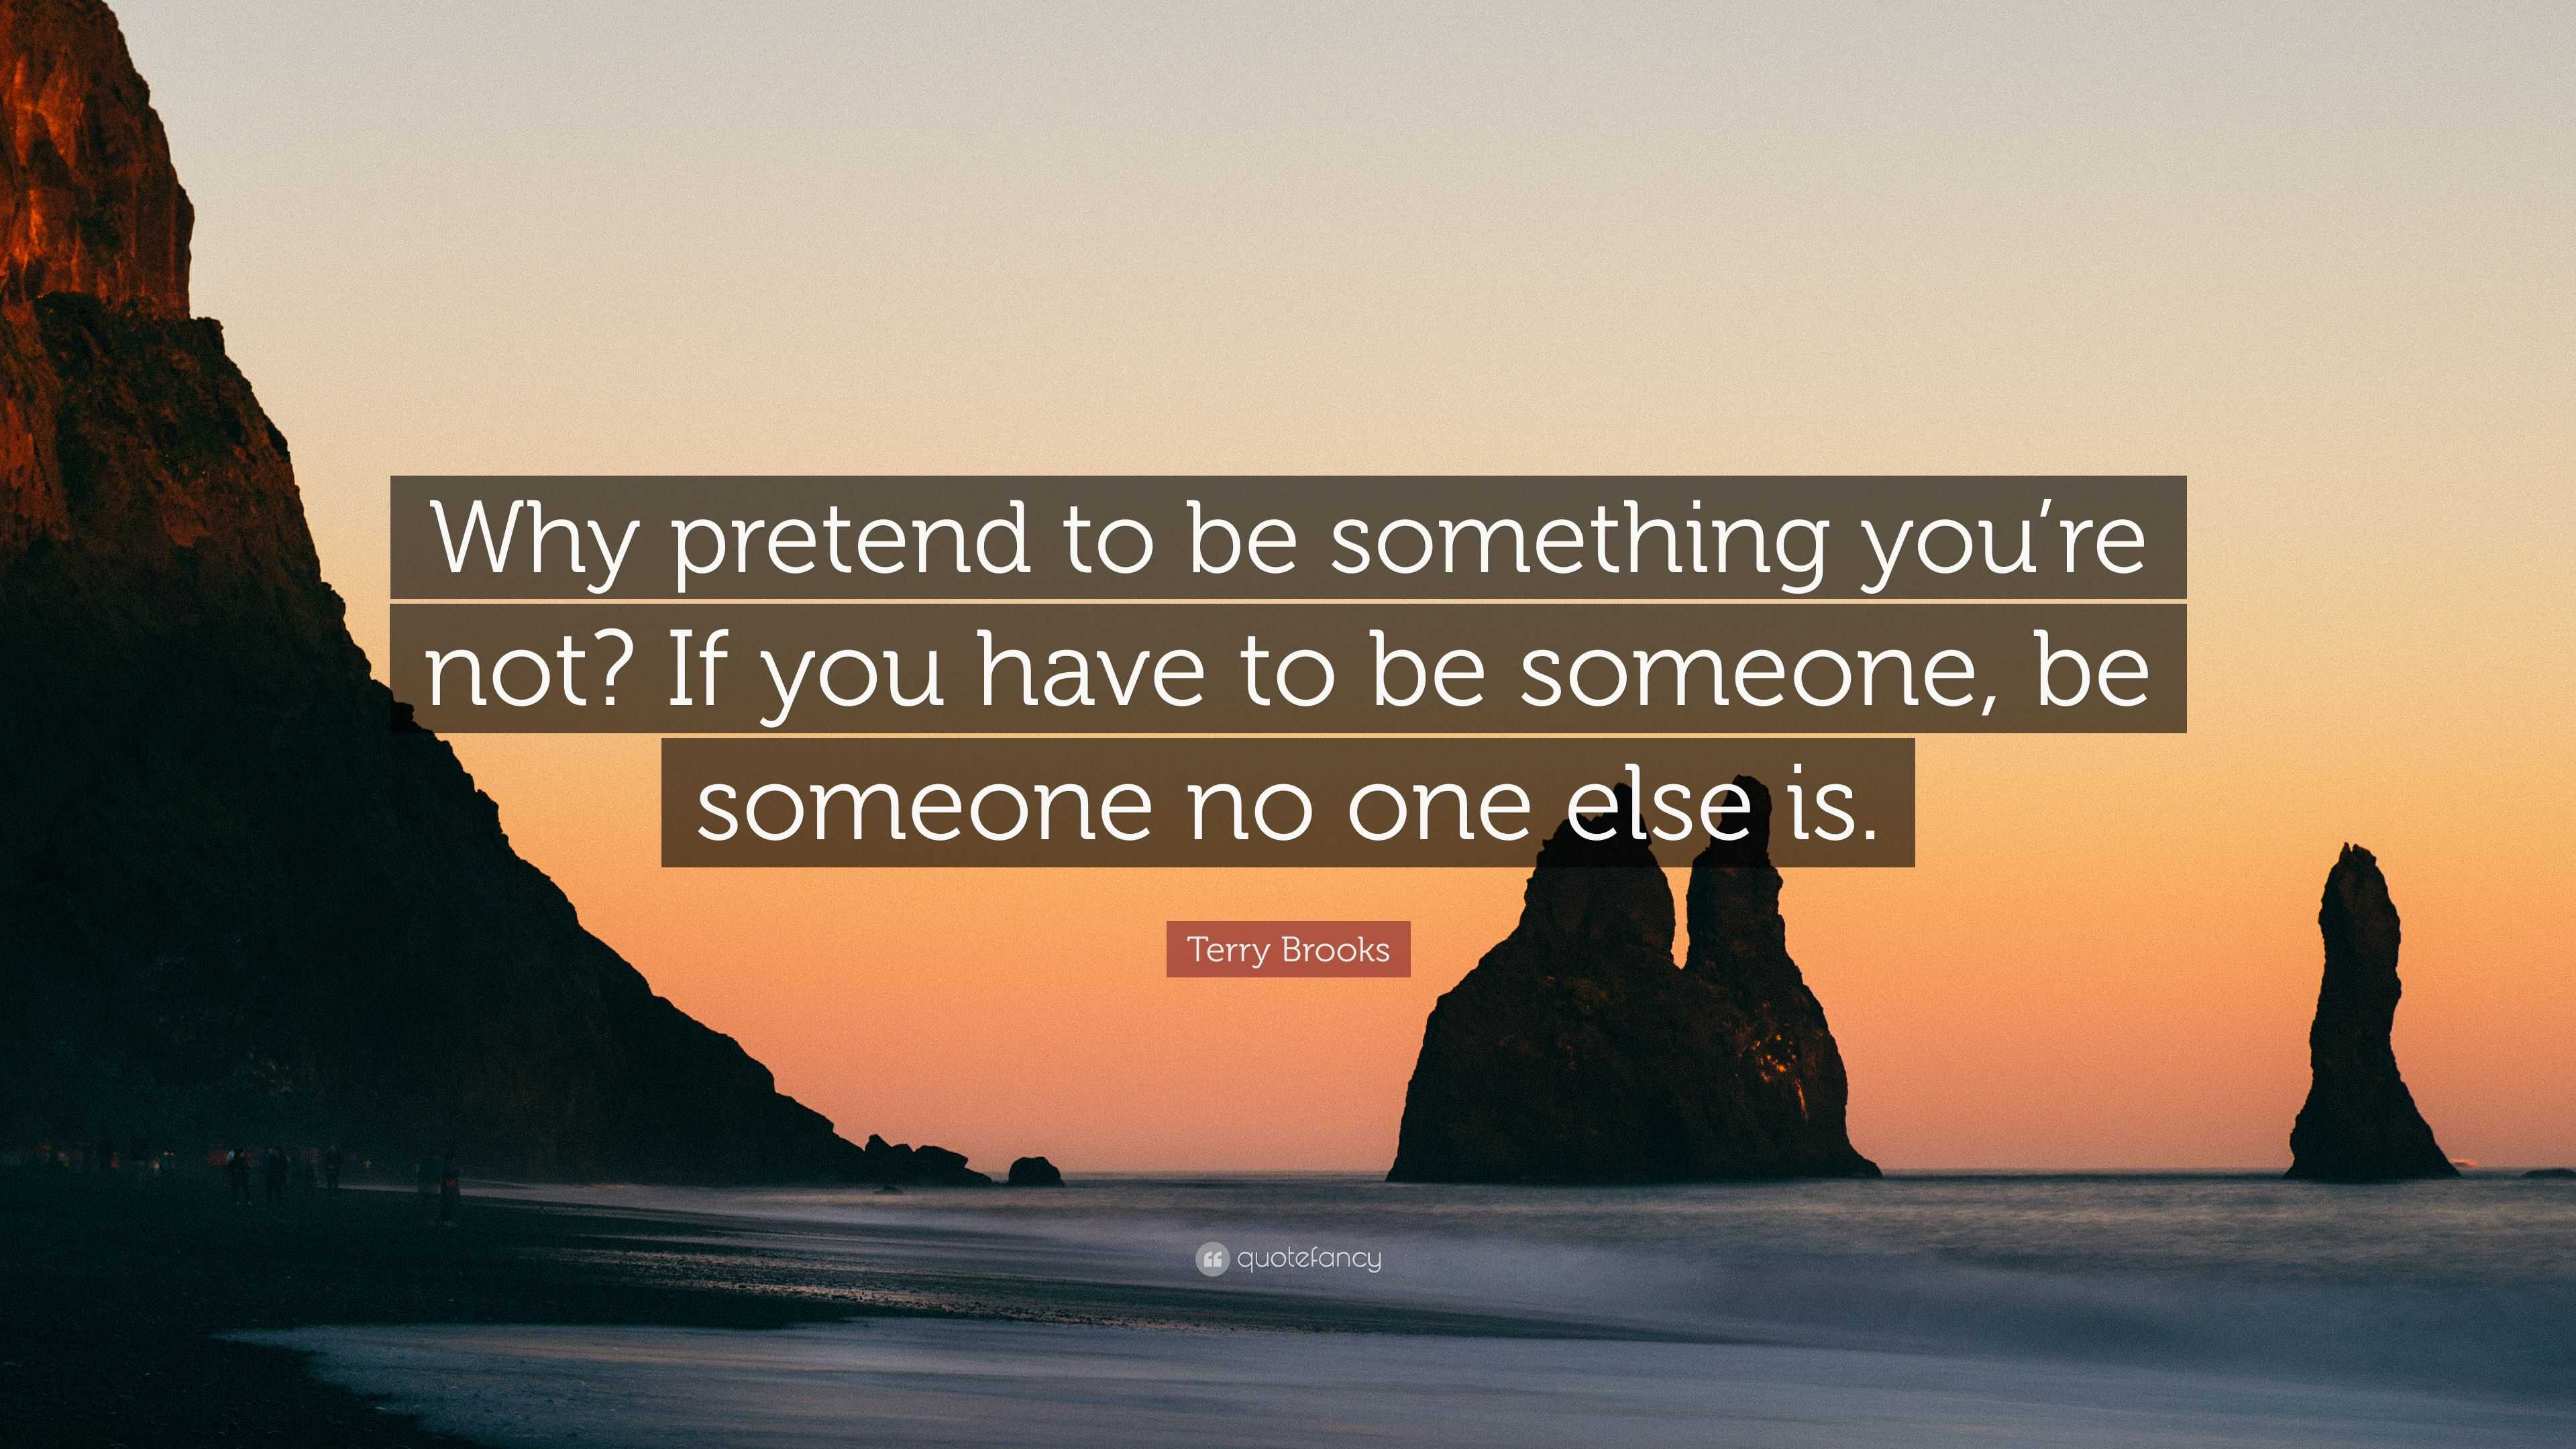 Are You Pretending to Be Something You're Not?